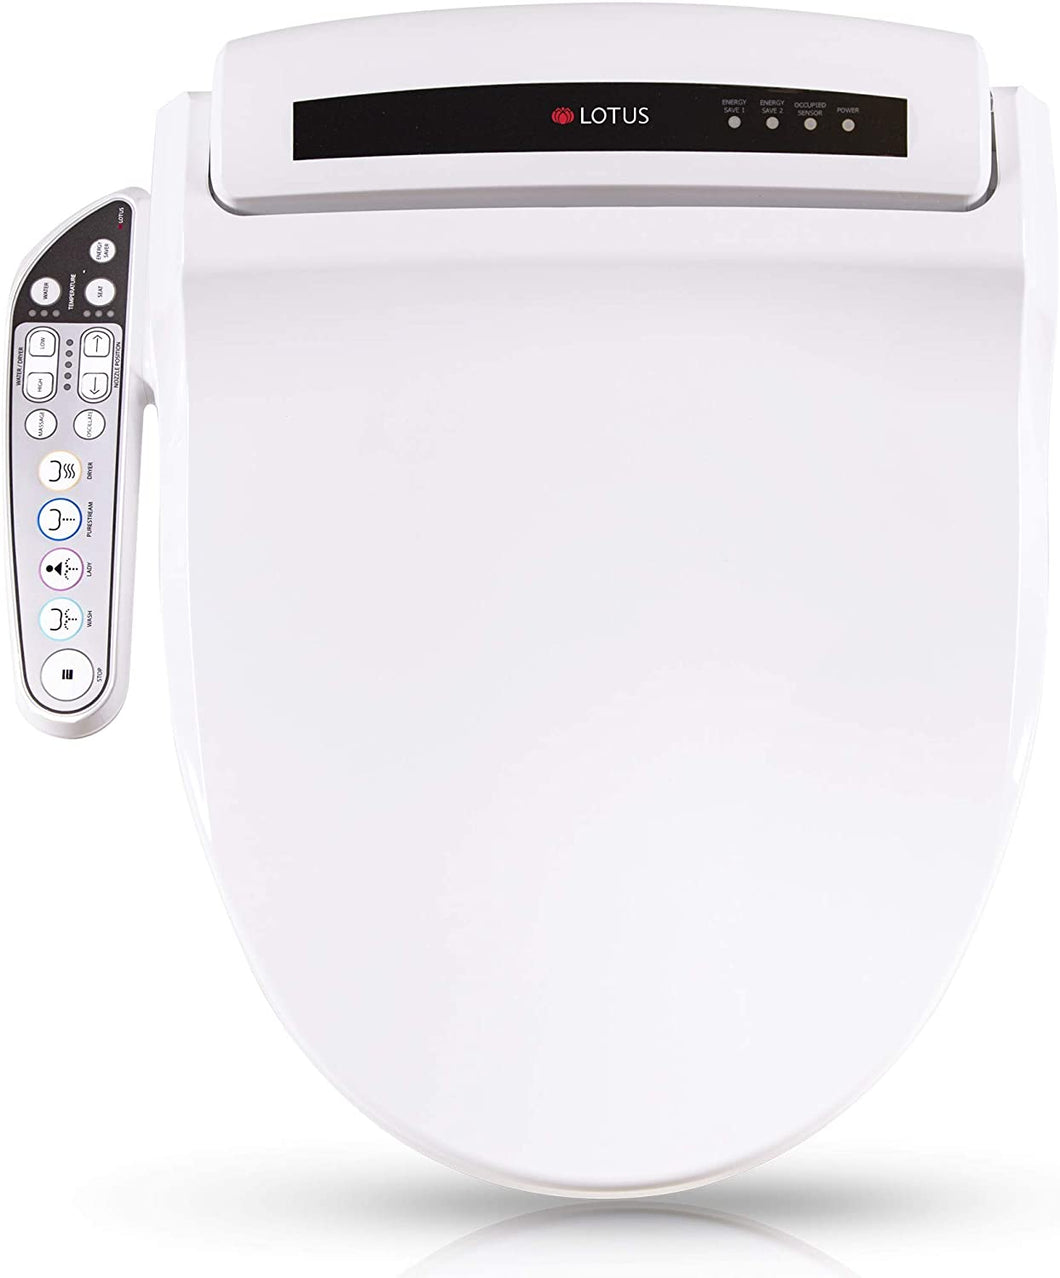 Lotus Hygiene ATS 909 Bidet Toilet Seat with PureStream® + Side Control - Elongated top view